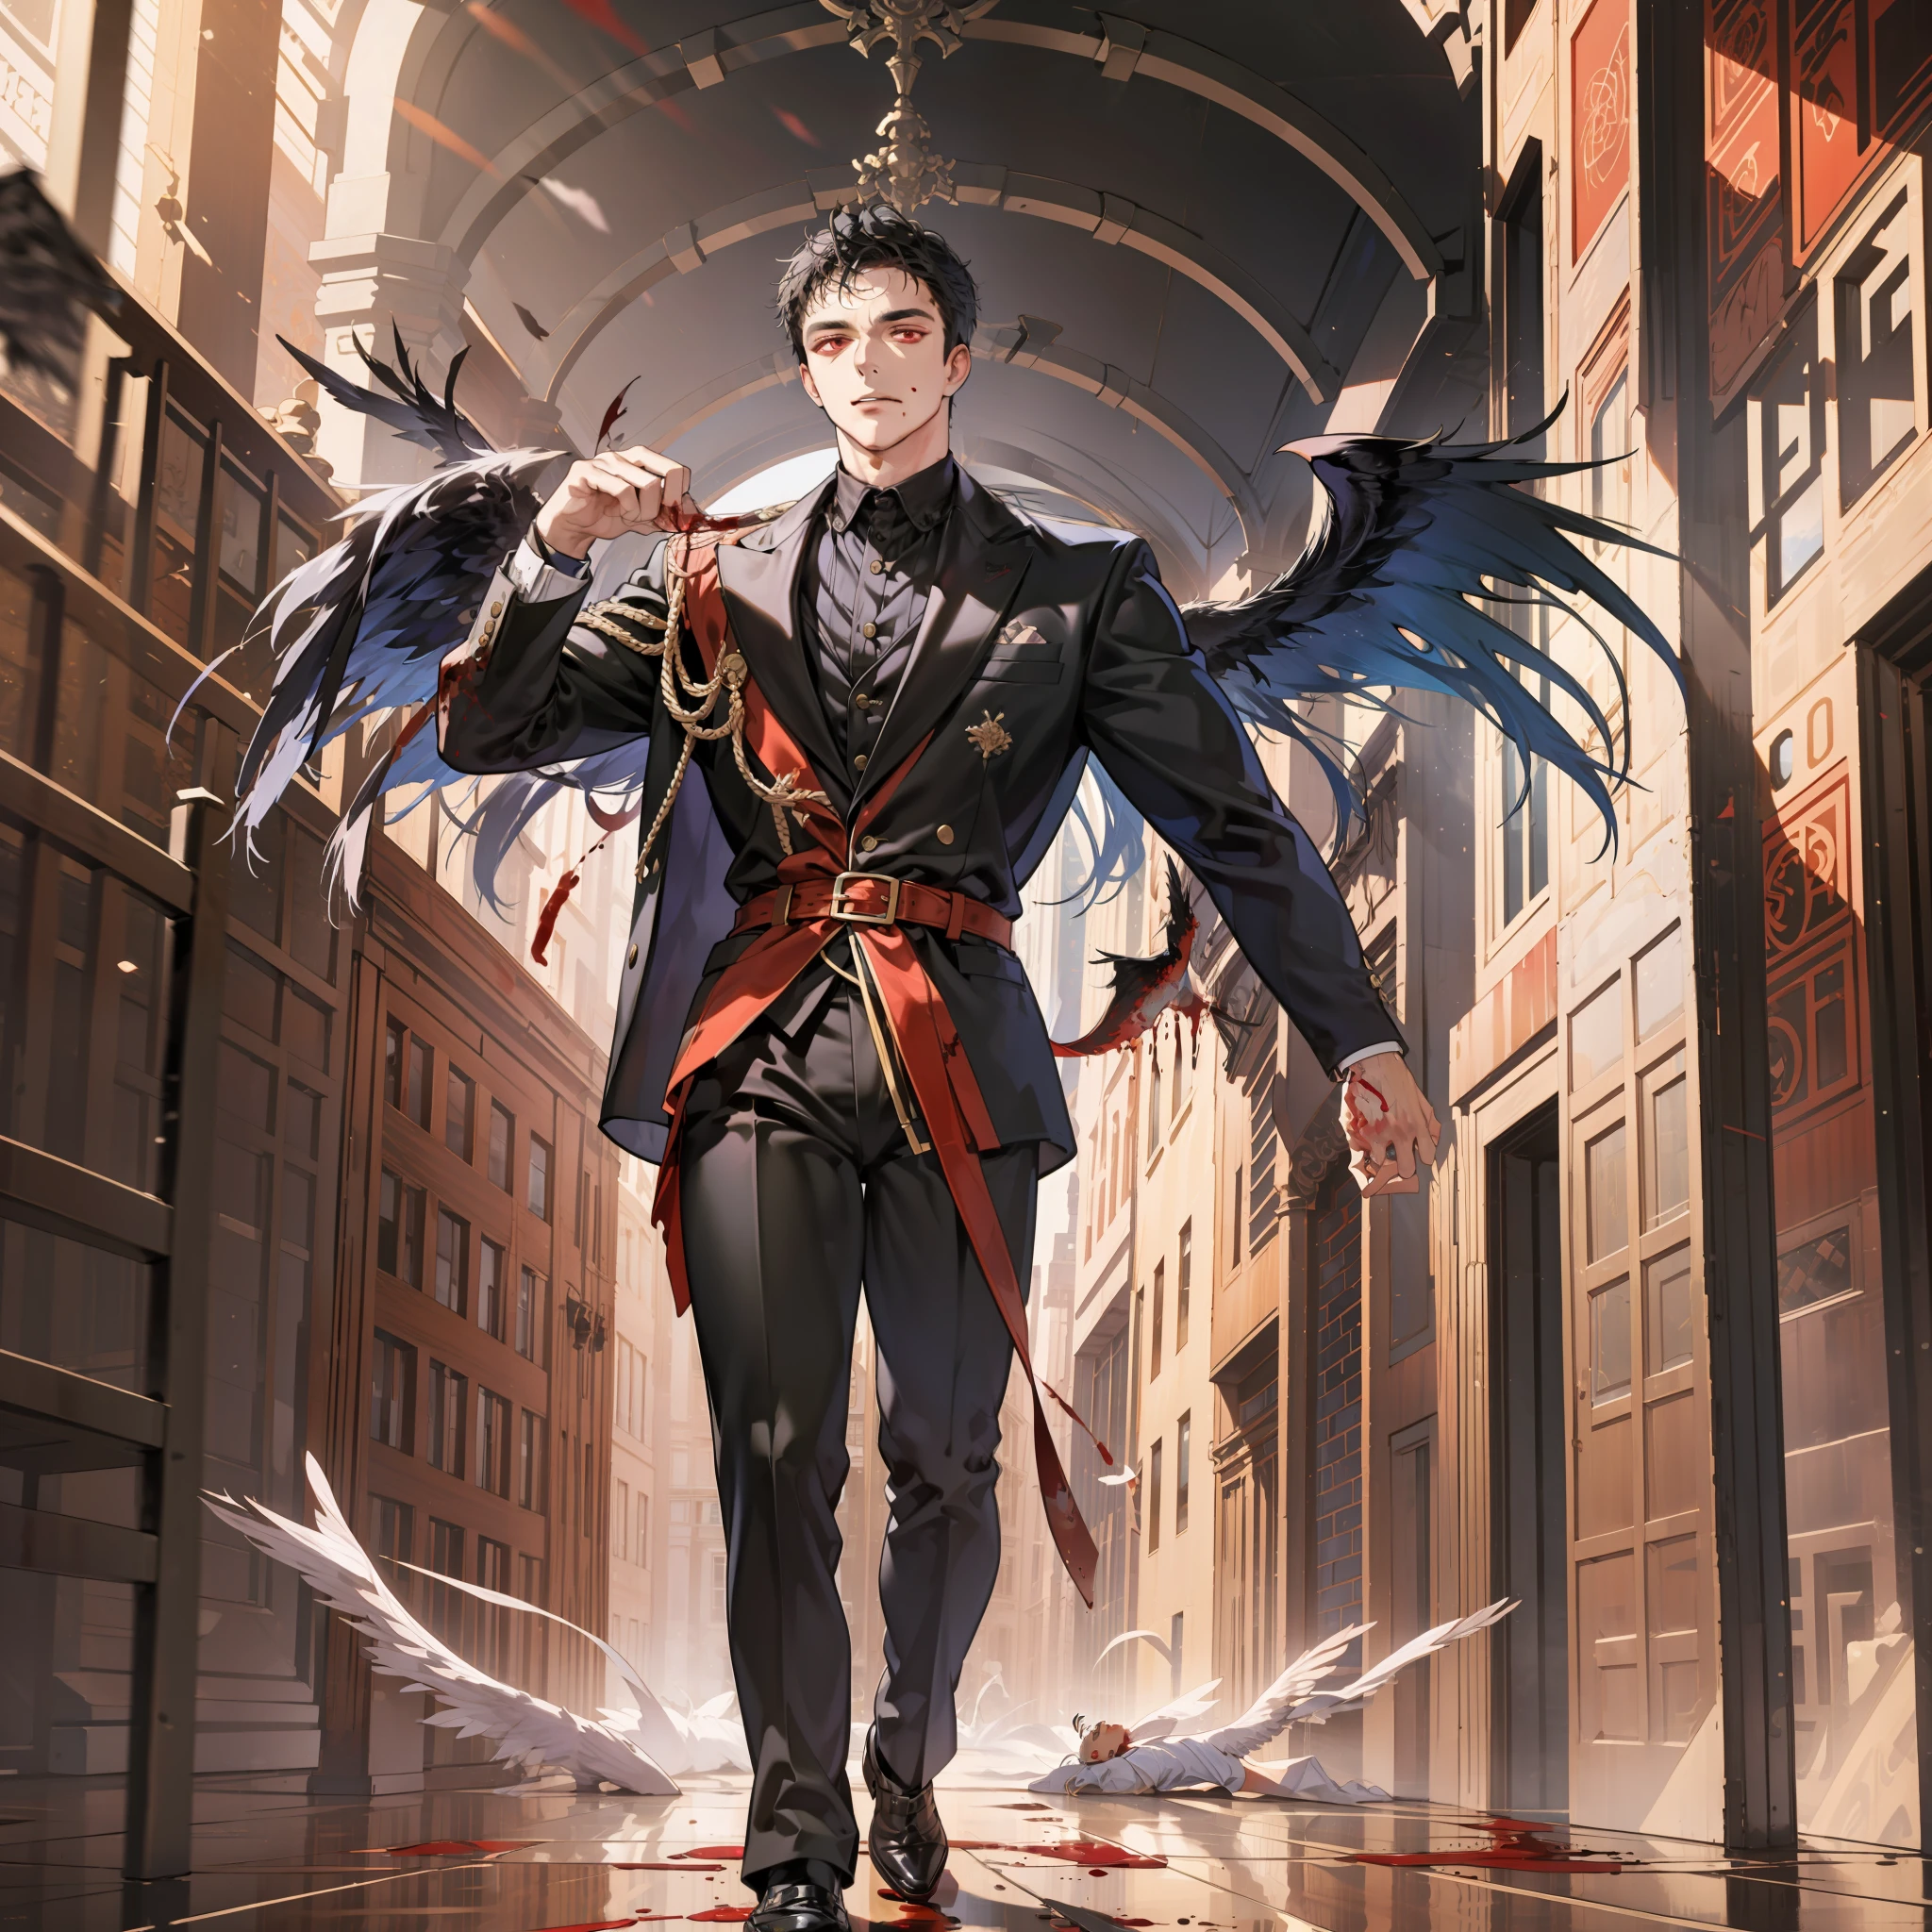 Tall, commanding CEO-like figure with short black hair, blood-red eyes, and clean-shaven face. Accented with pure black wings, exuding authority and sophistication in his sophisticated attire.